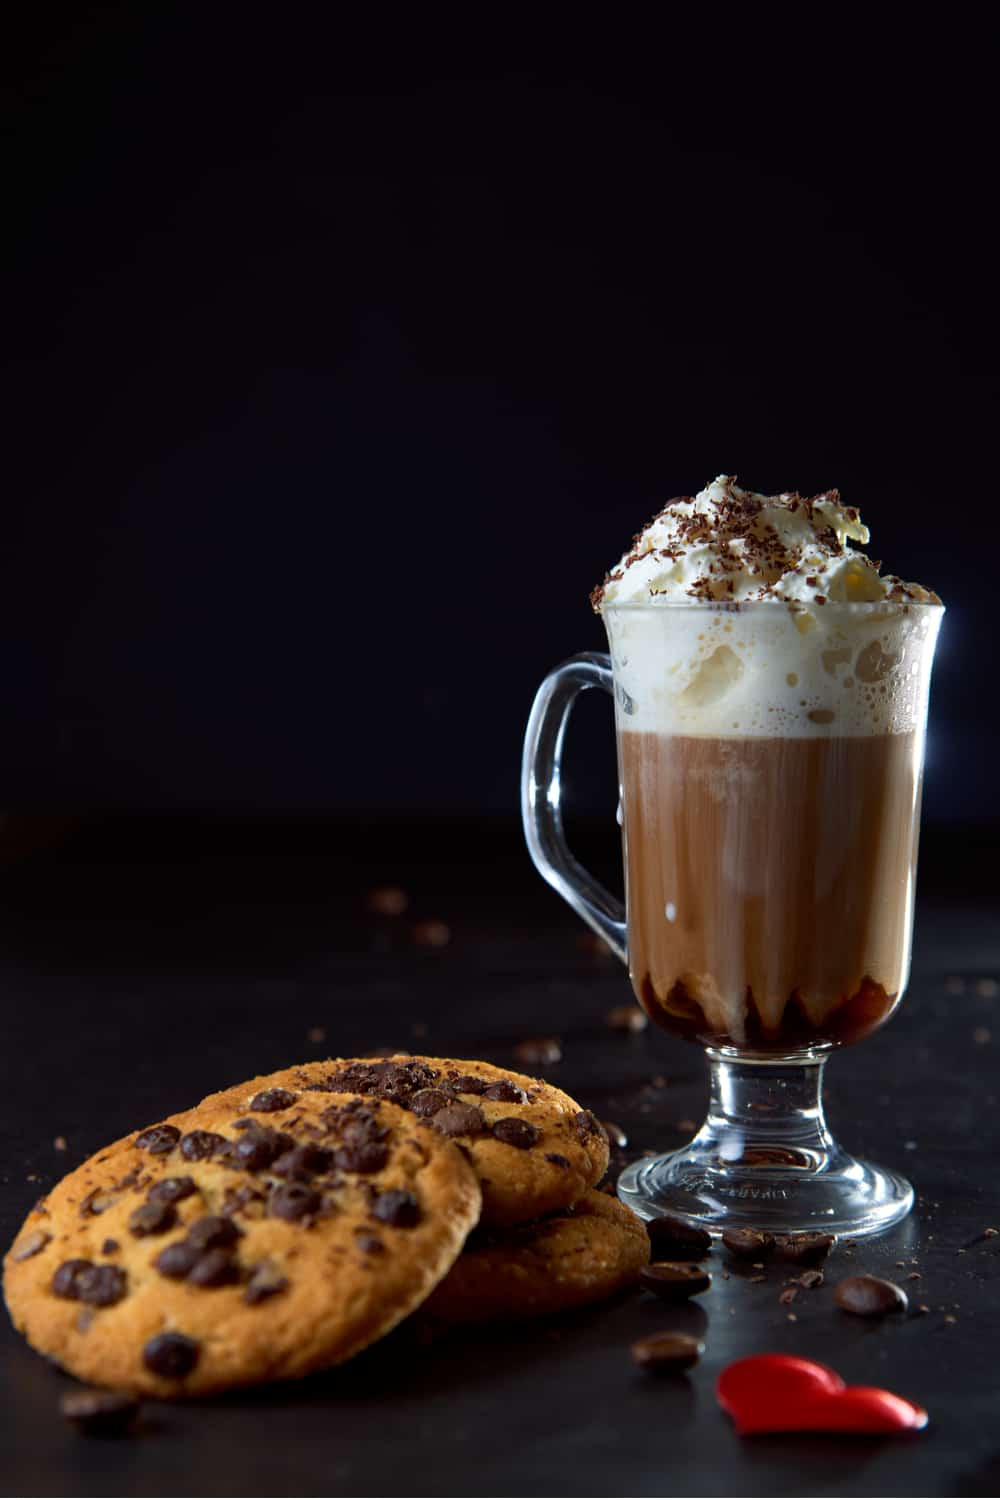 The Chocolate Chip Cookie Coffee Creamer